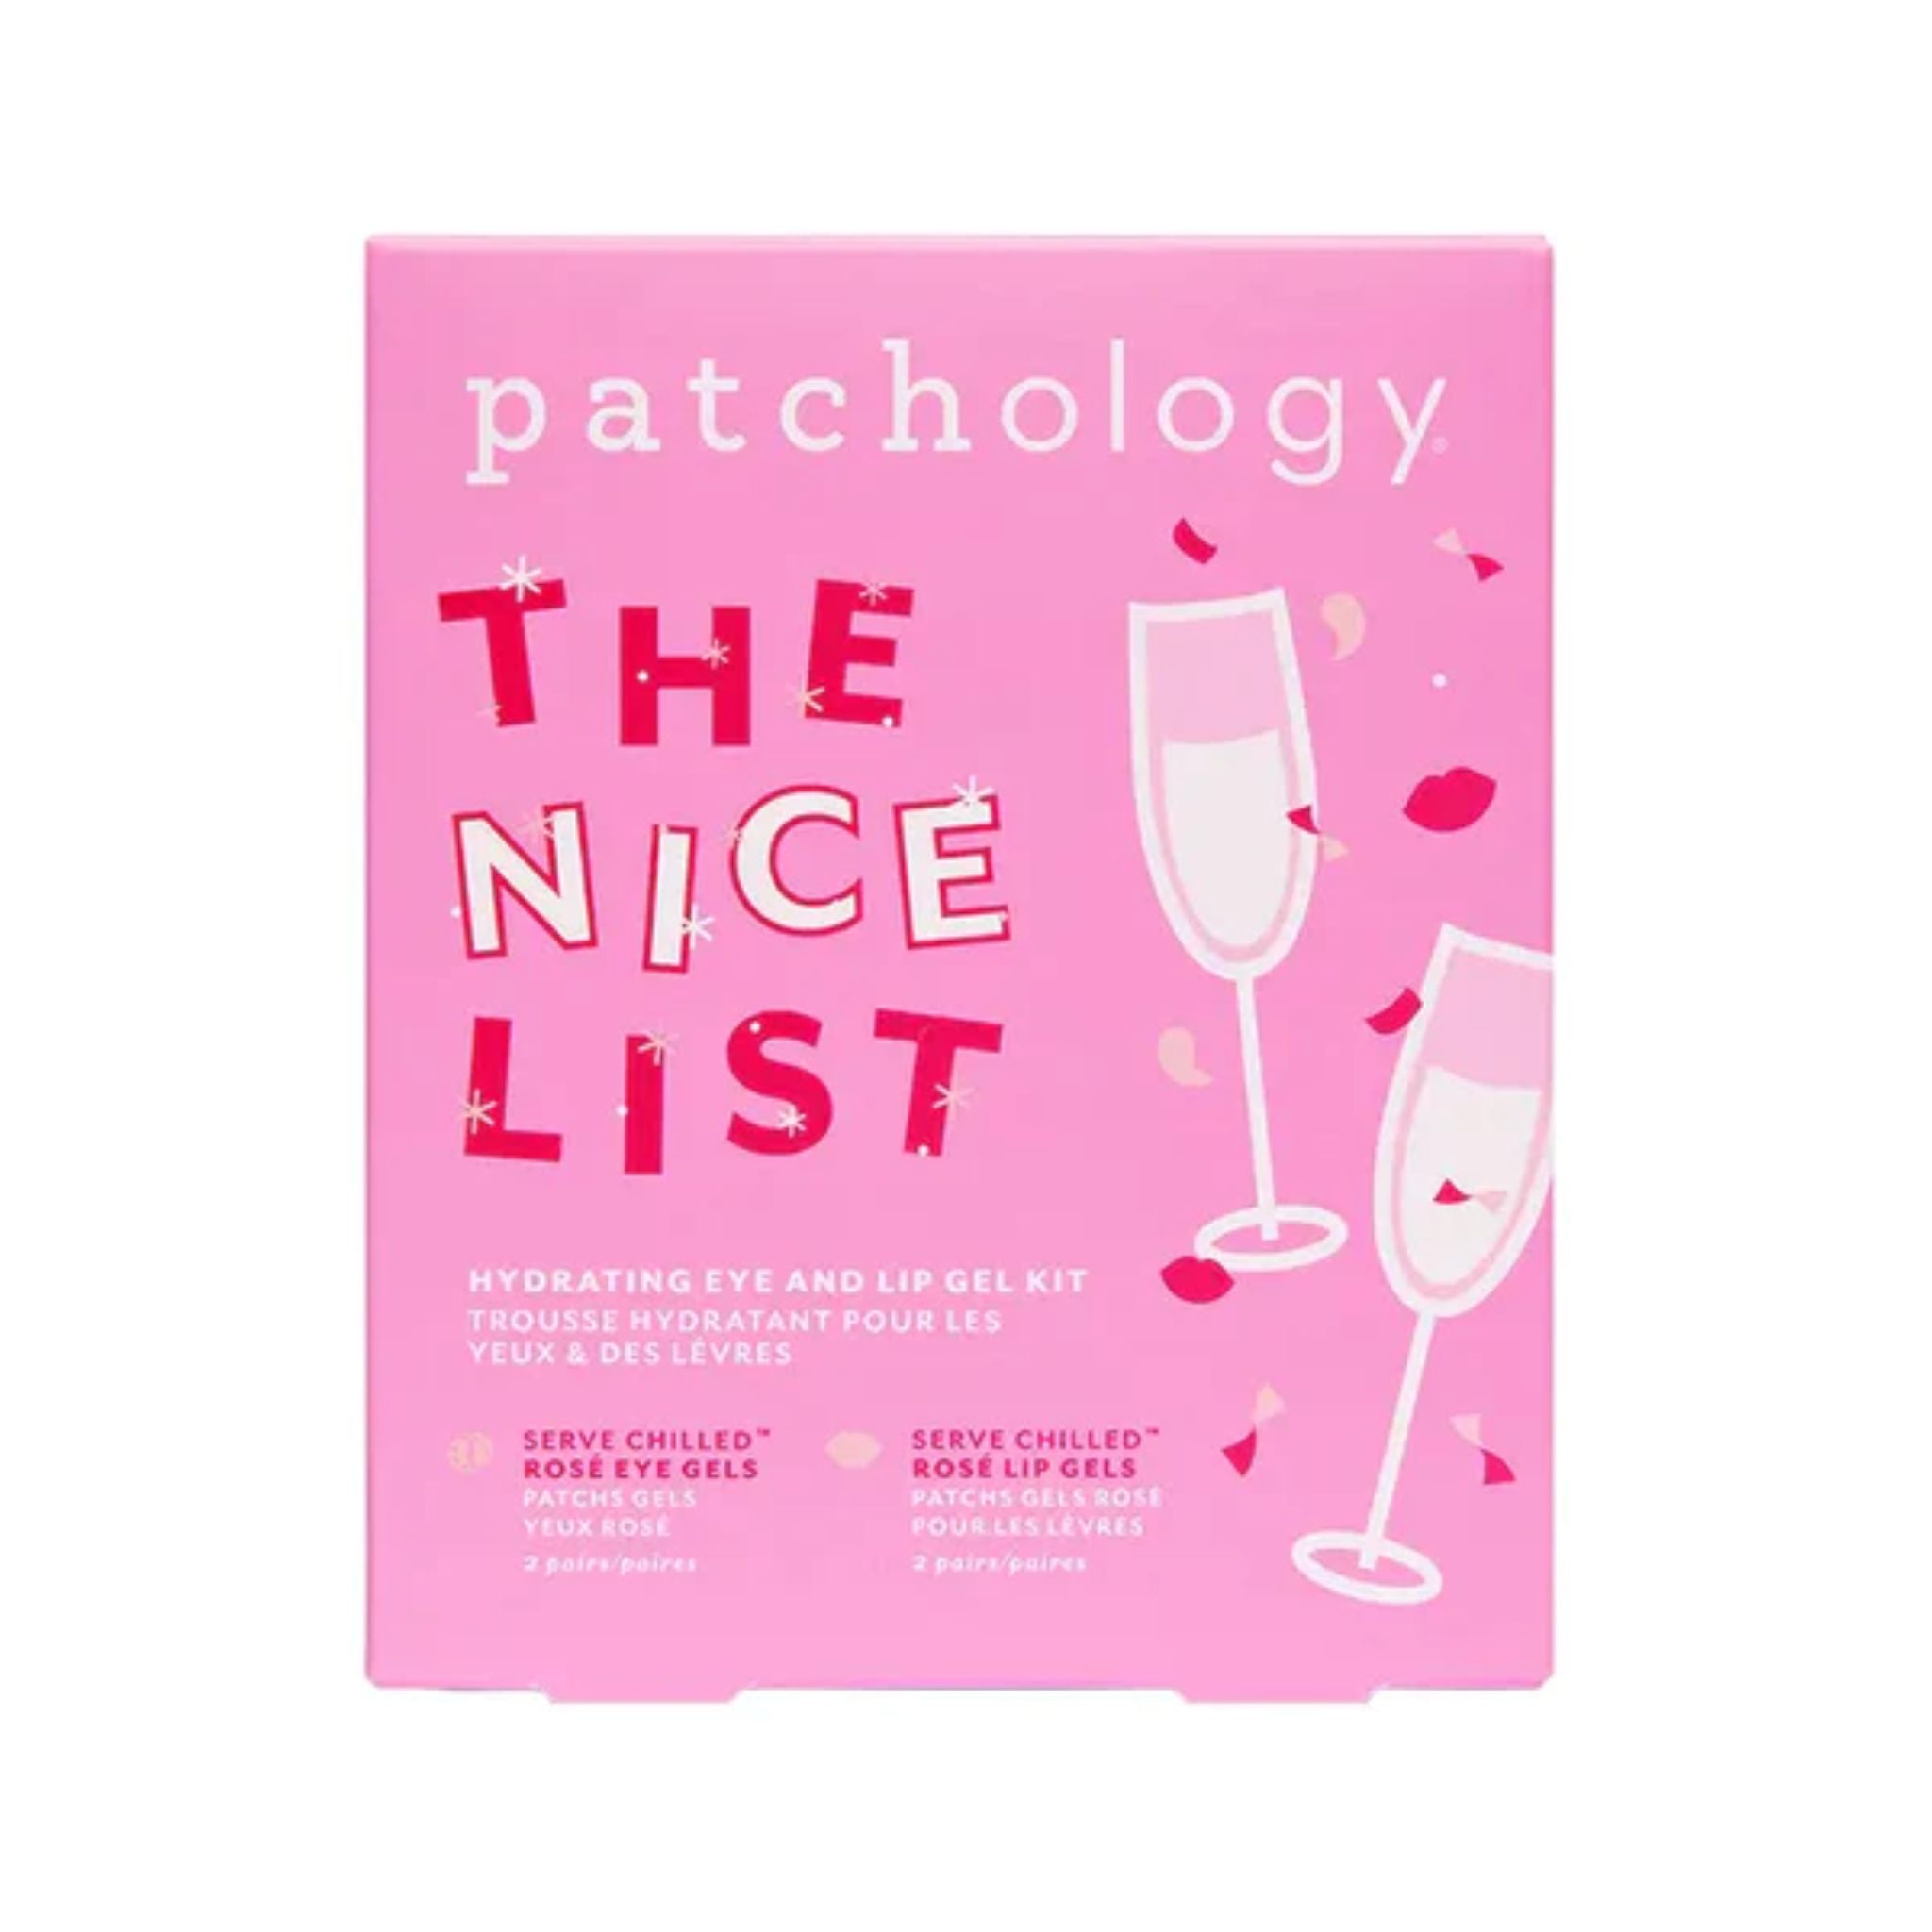 Patchology - The Nice List Holiday Kit